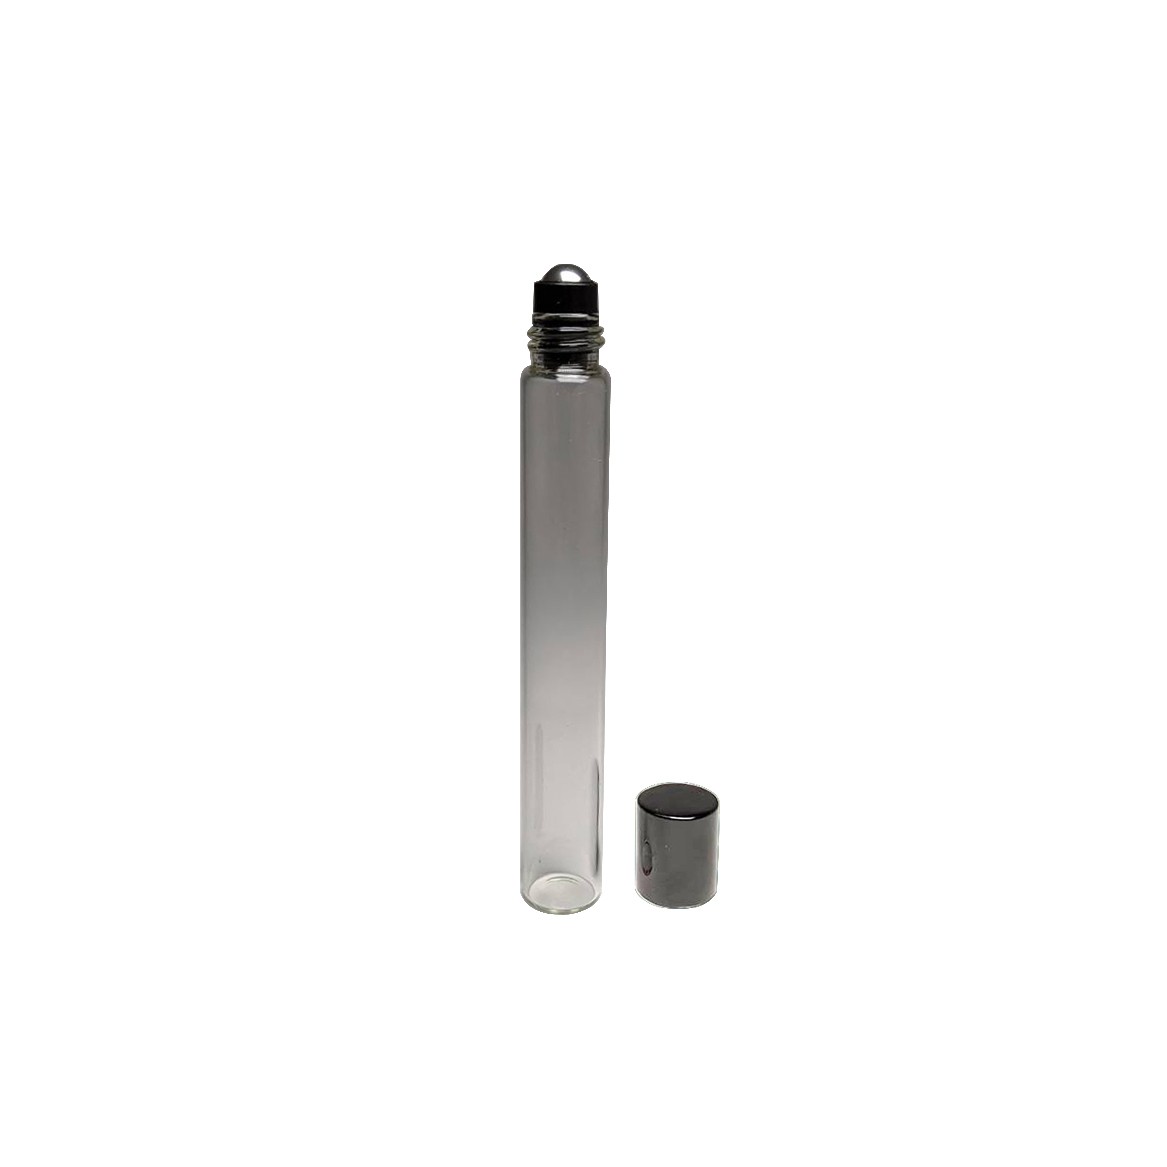 Unique packaging empty 10ml matte glass bottle with stainless roller ball and cap for oil bottle